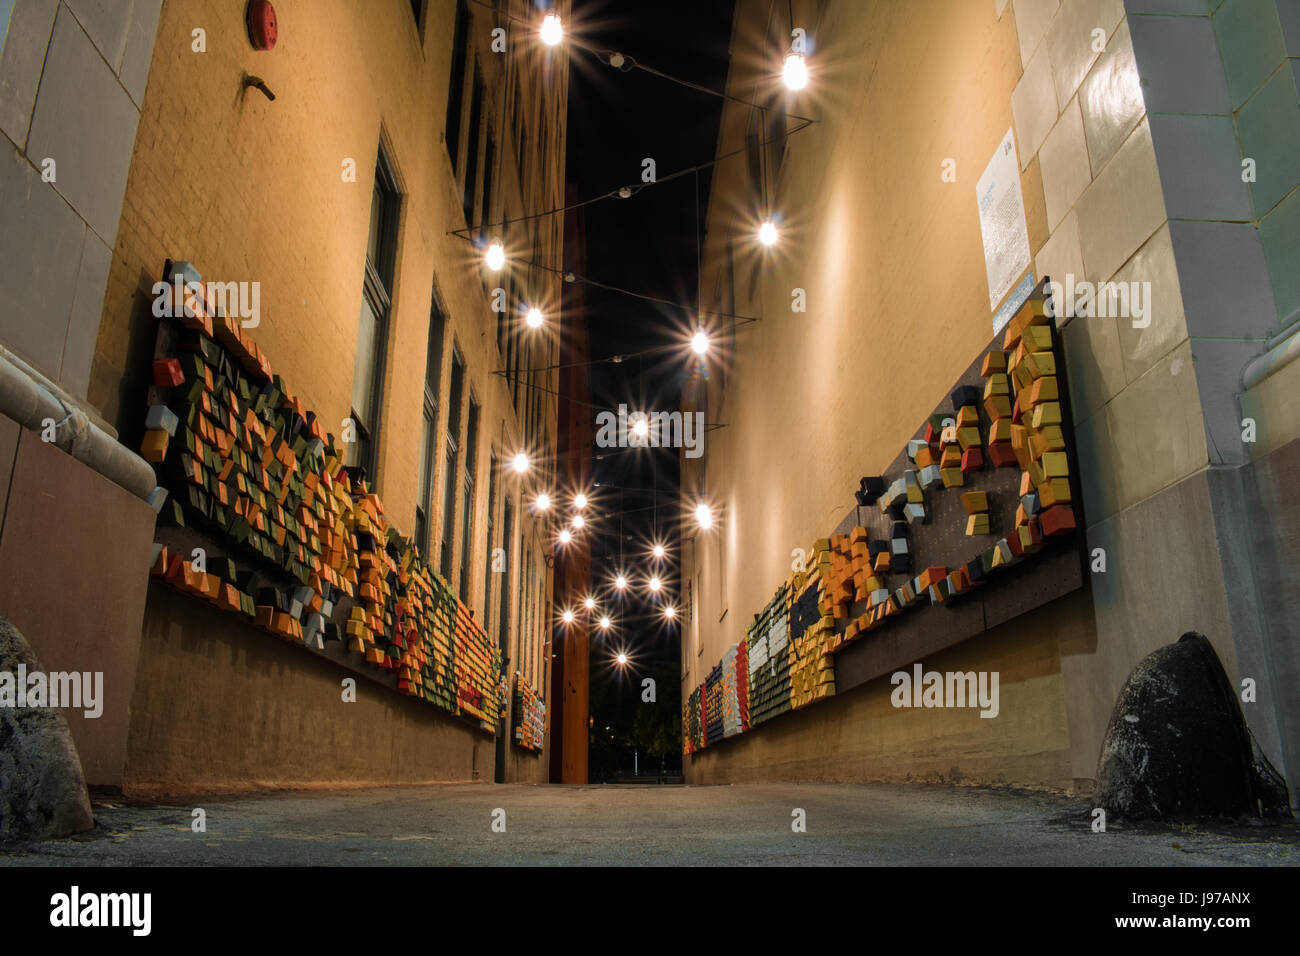 Downtown Chattanooga City Night Creative Art Alley Stock Photo